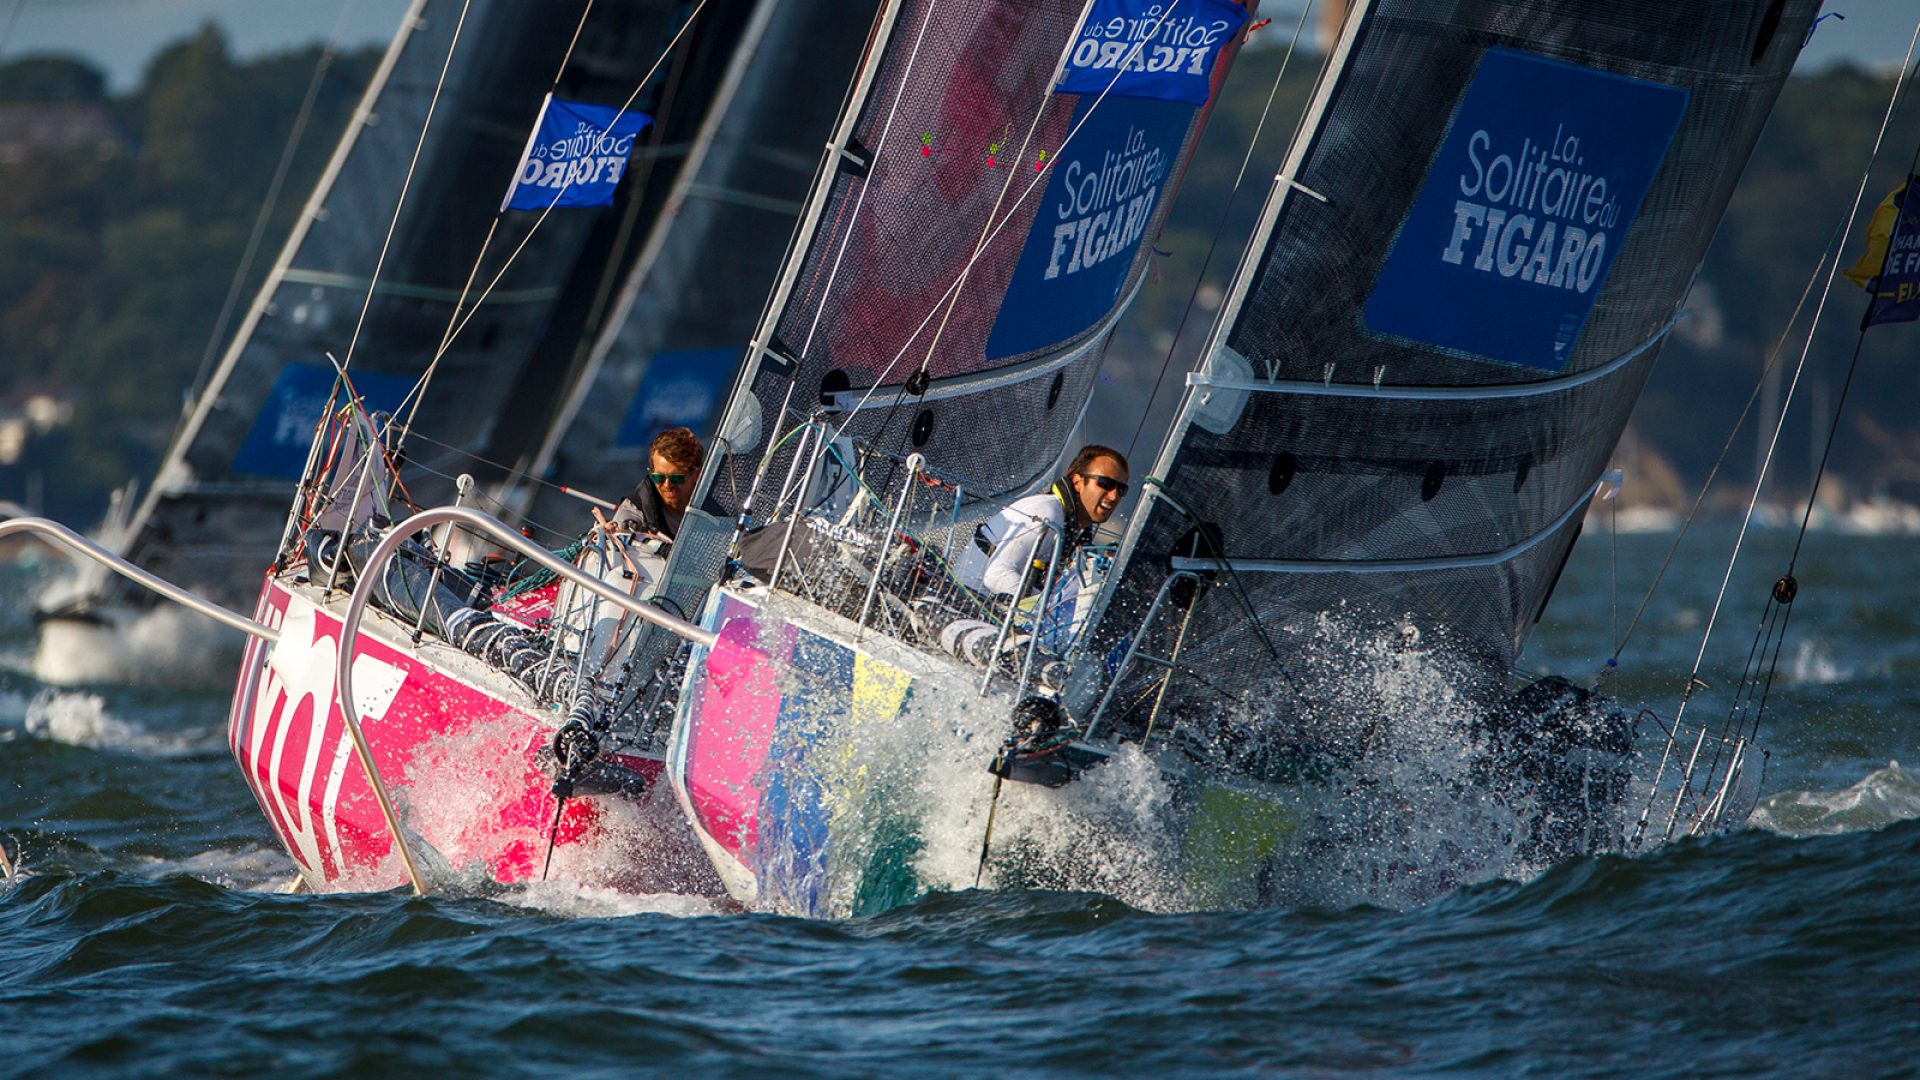 Skippers Solitaire du Figaro 2021